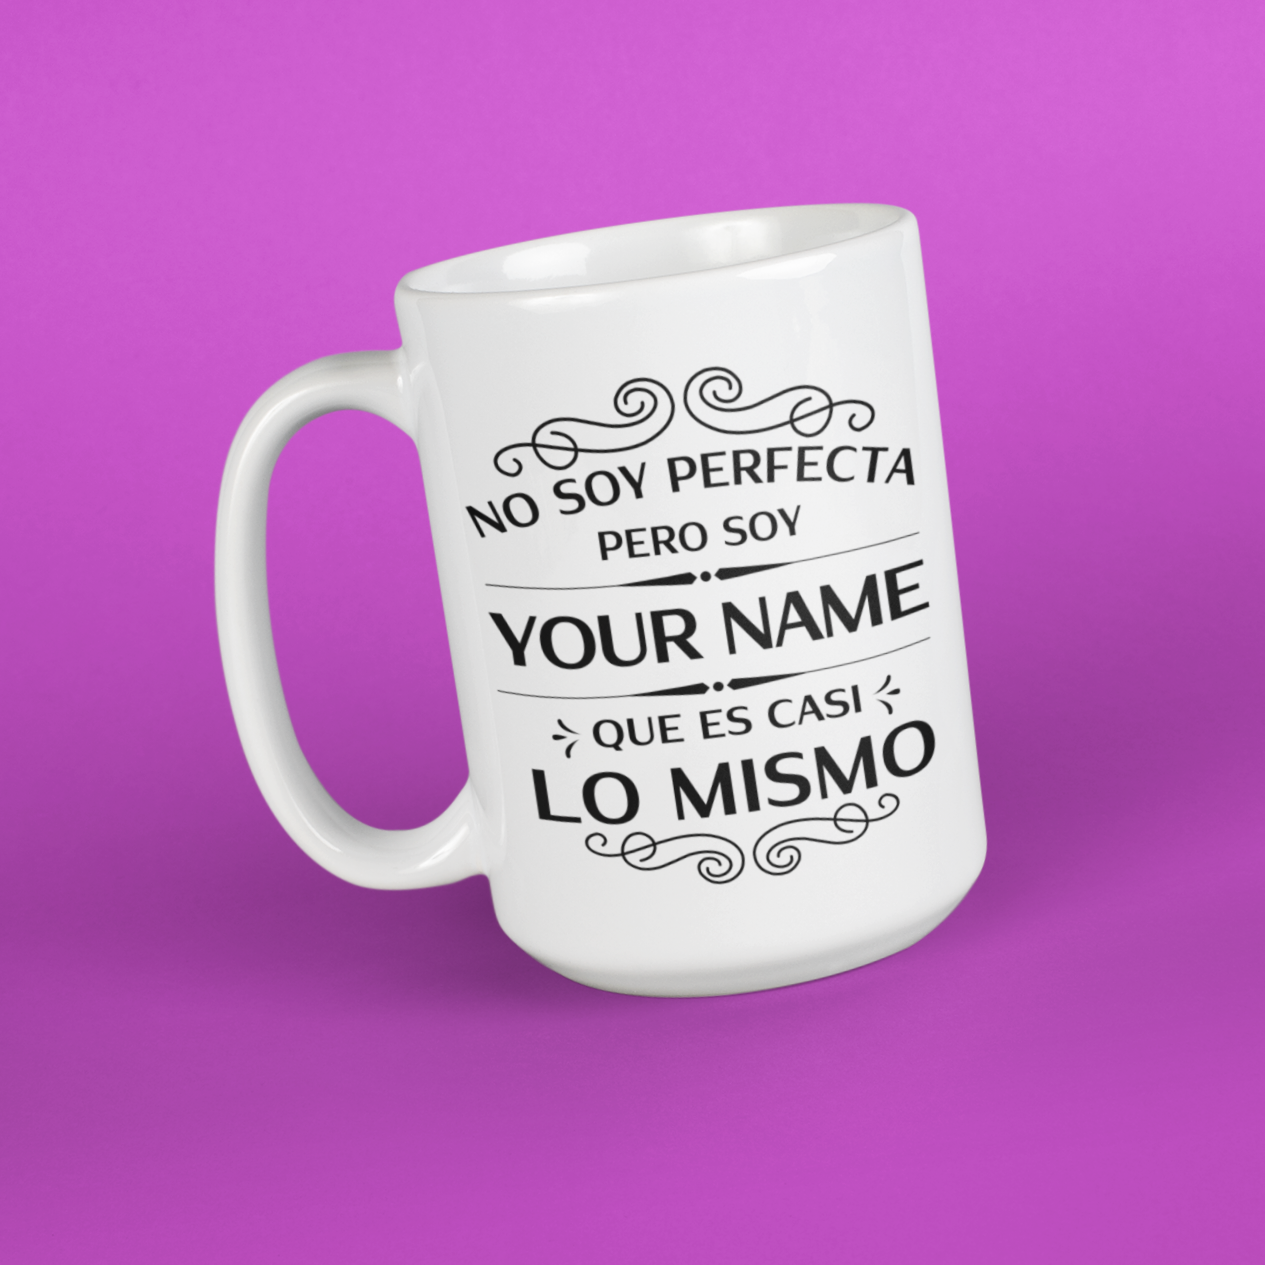 angled version of a Tall white mug for Latinas and Spanish speakers. The mug can be personalized to add someones last name (Apellido). In black lettering, the mug says "no soy perfecta, pero soy 'your name' que es casi lo mismo'